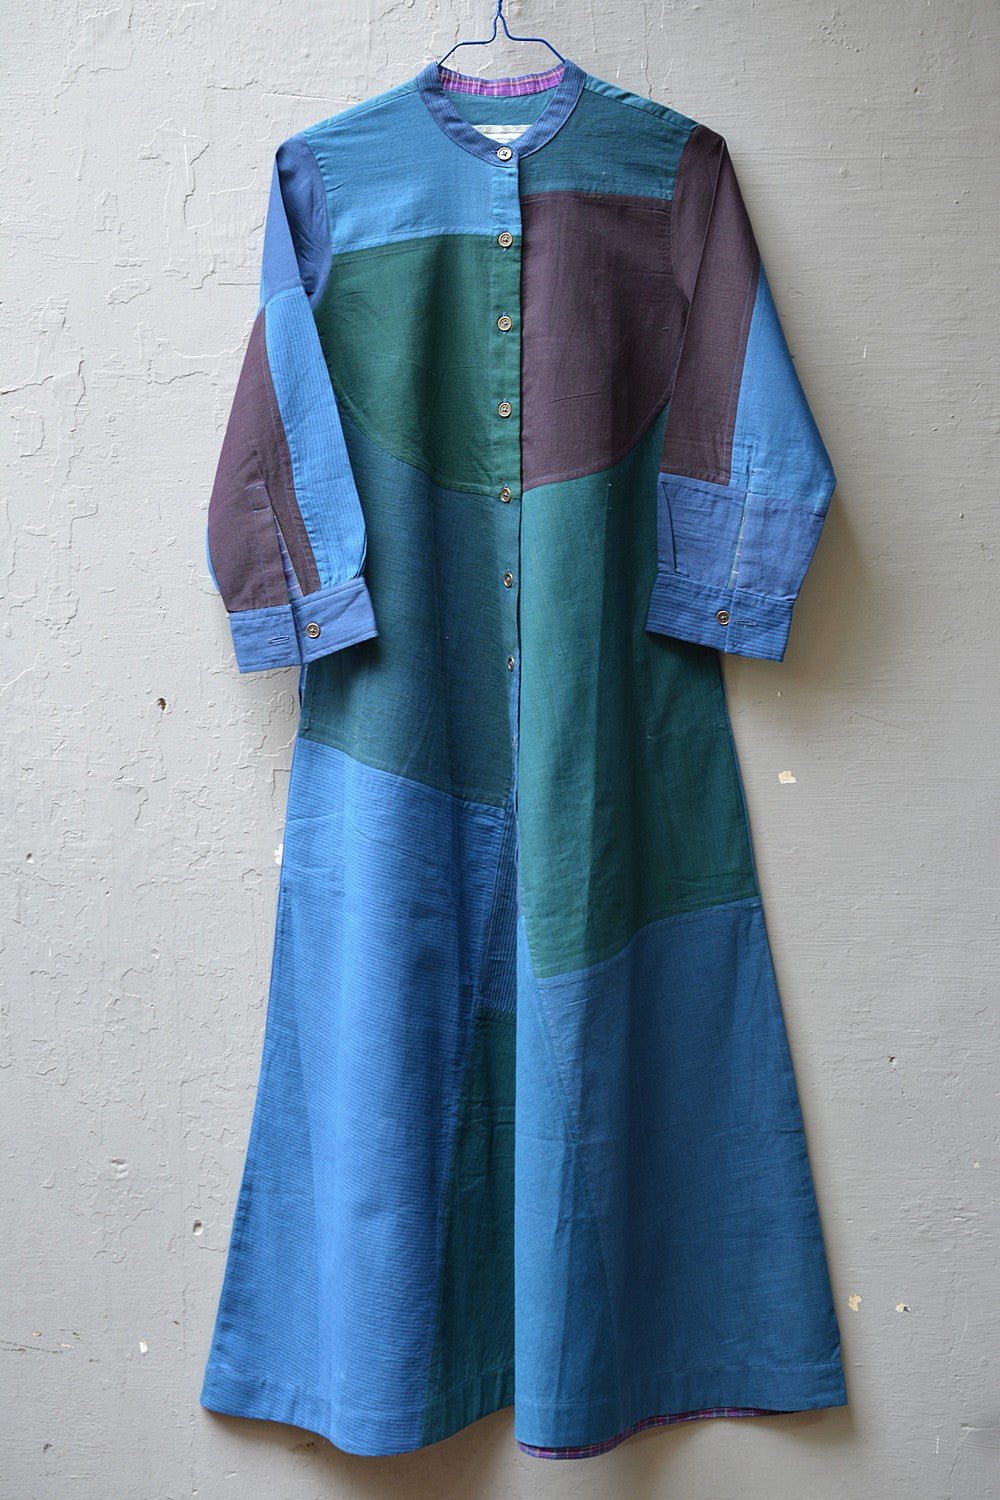 Upcycled Blue Dress in Size 'S' - metaphorracha